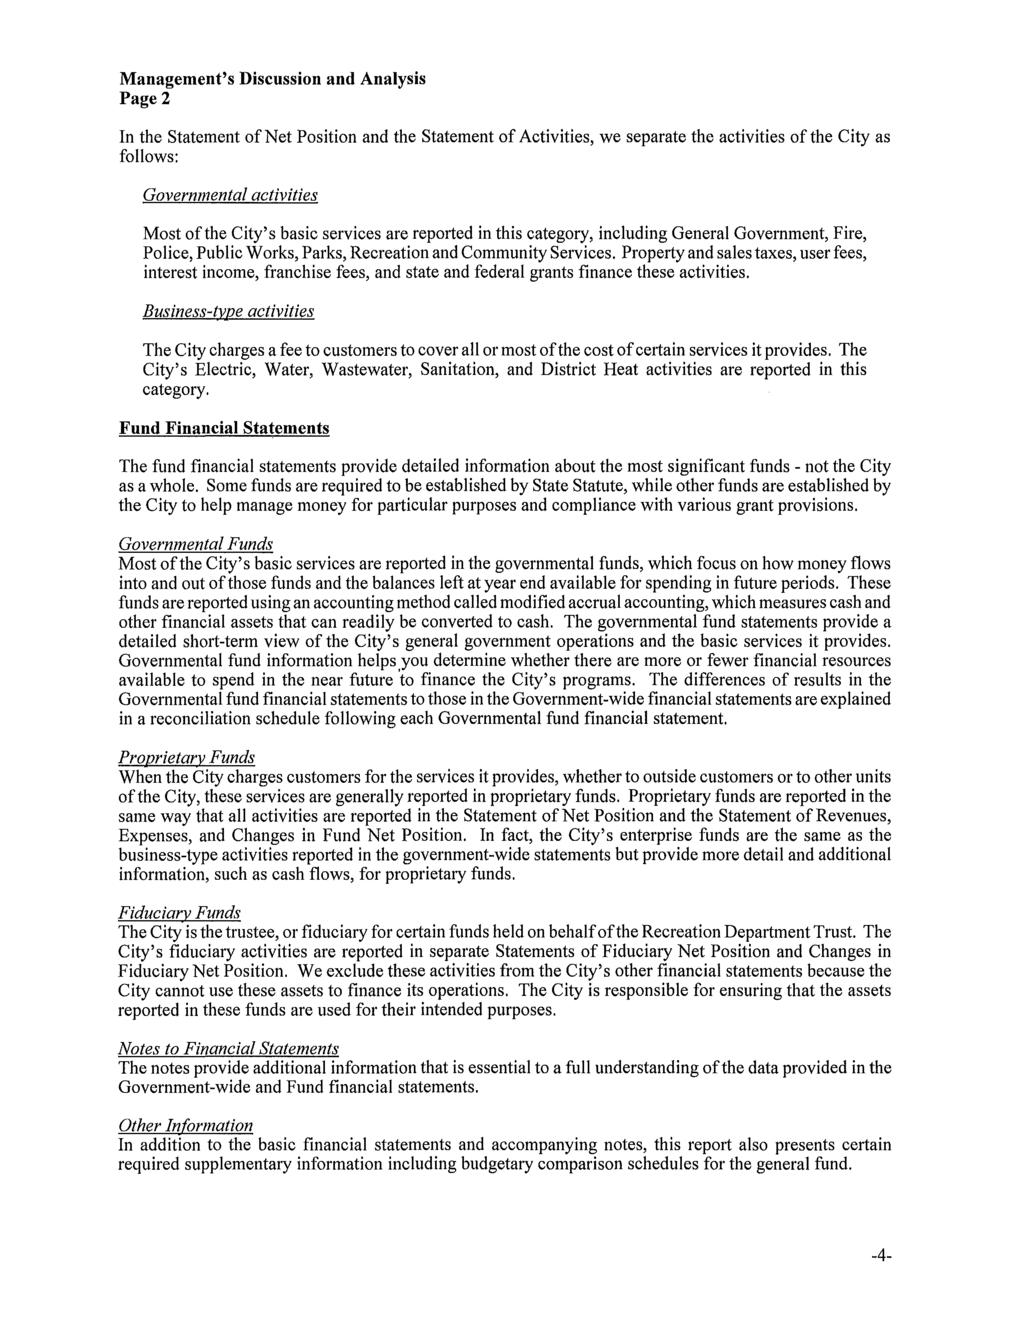 Management's Discussion and Analysis Page 2 In the Statement of Net Position and the Statement of Activities, we separate the activities of the City as follows: Governmental activities Most of the